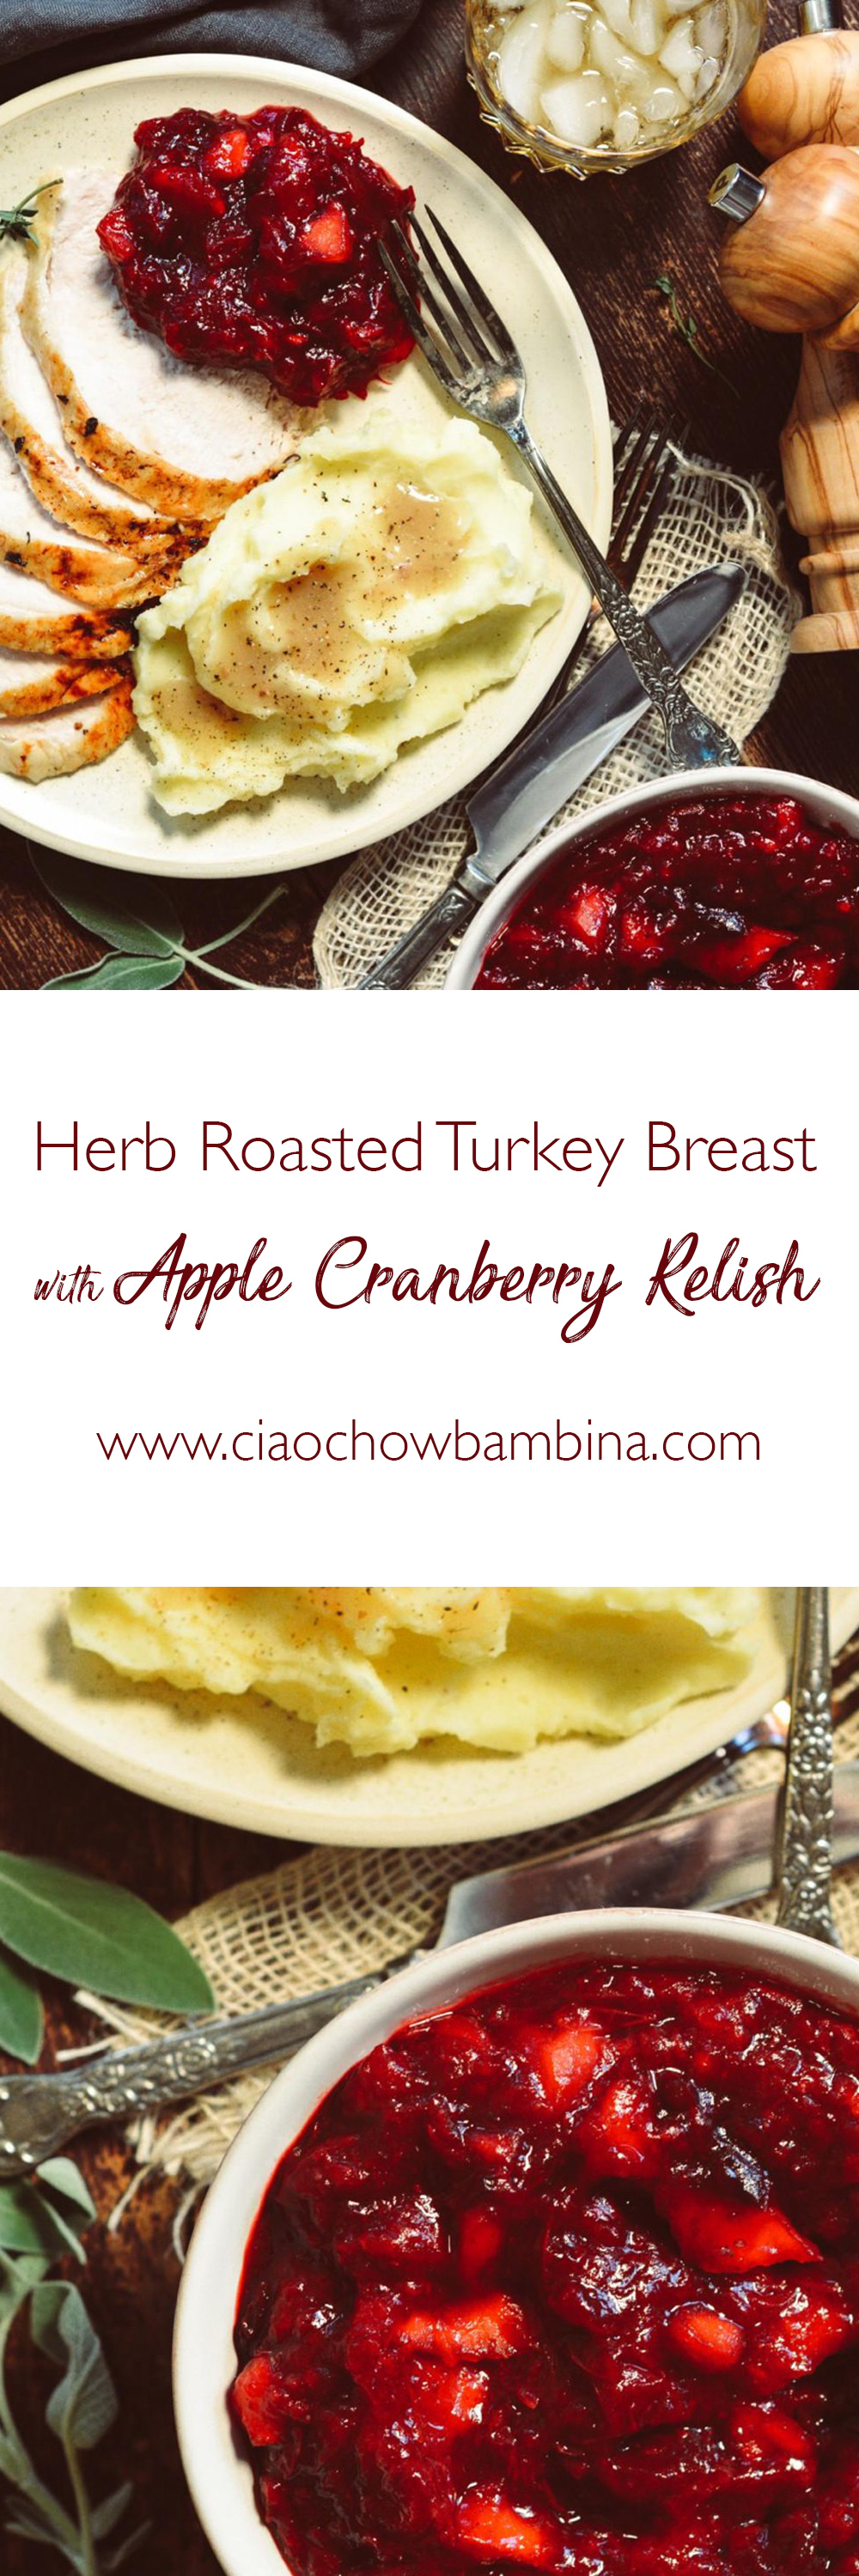 Herb Roasted Turkey Breast with Apple Cranberry Relish ciaochowbambina.com